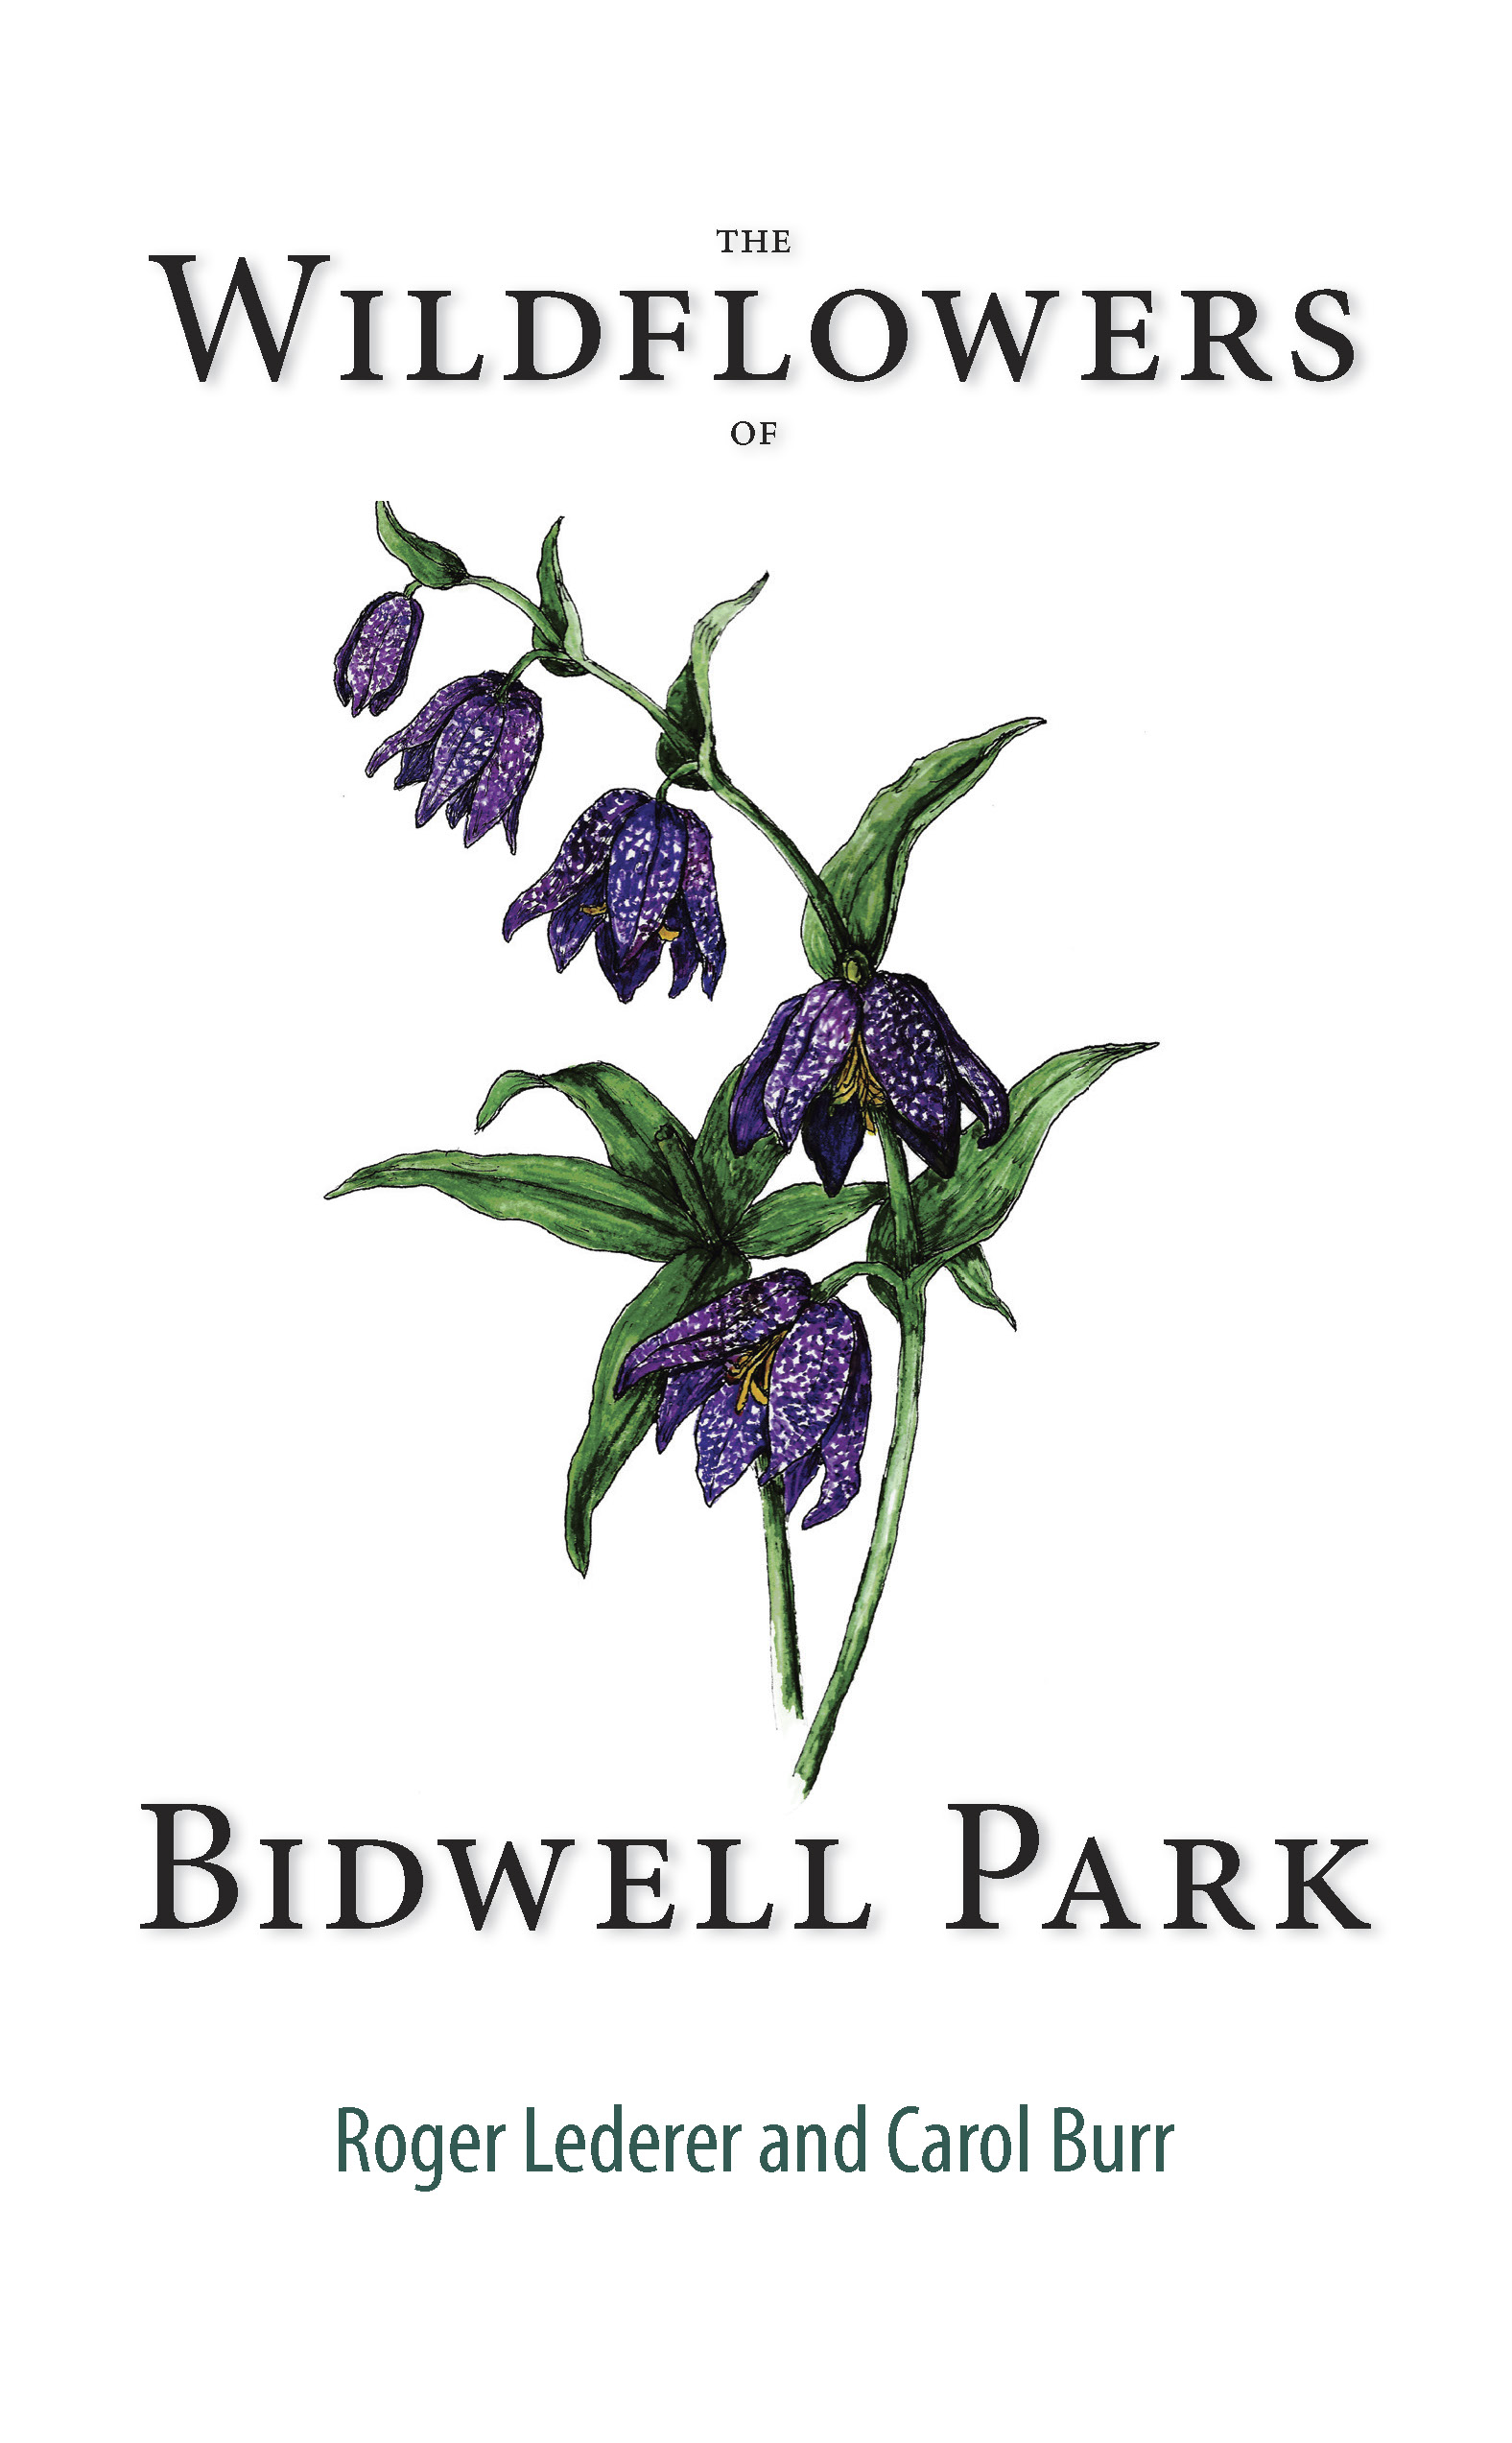 The Wildflowers of Bidwell Park